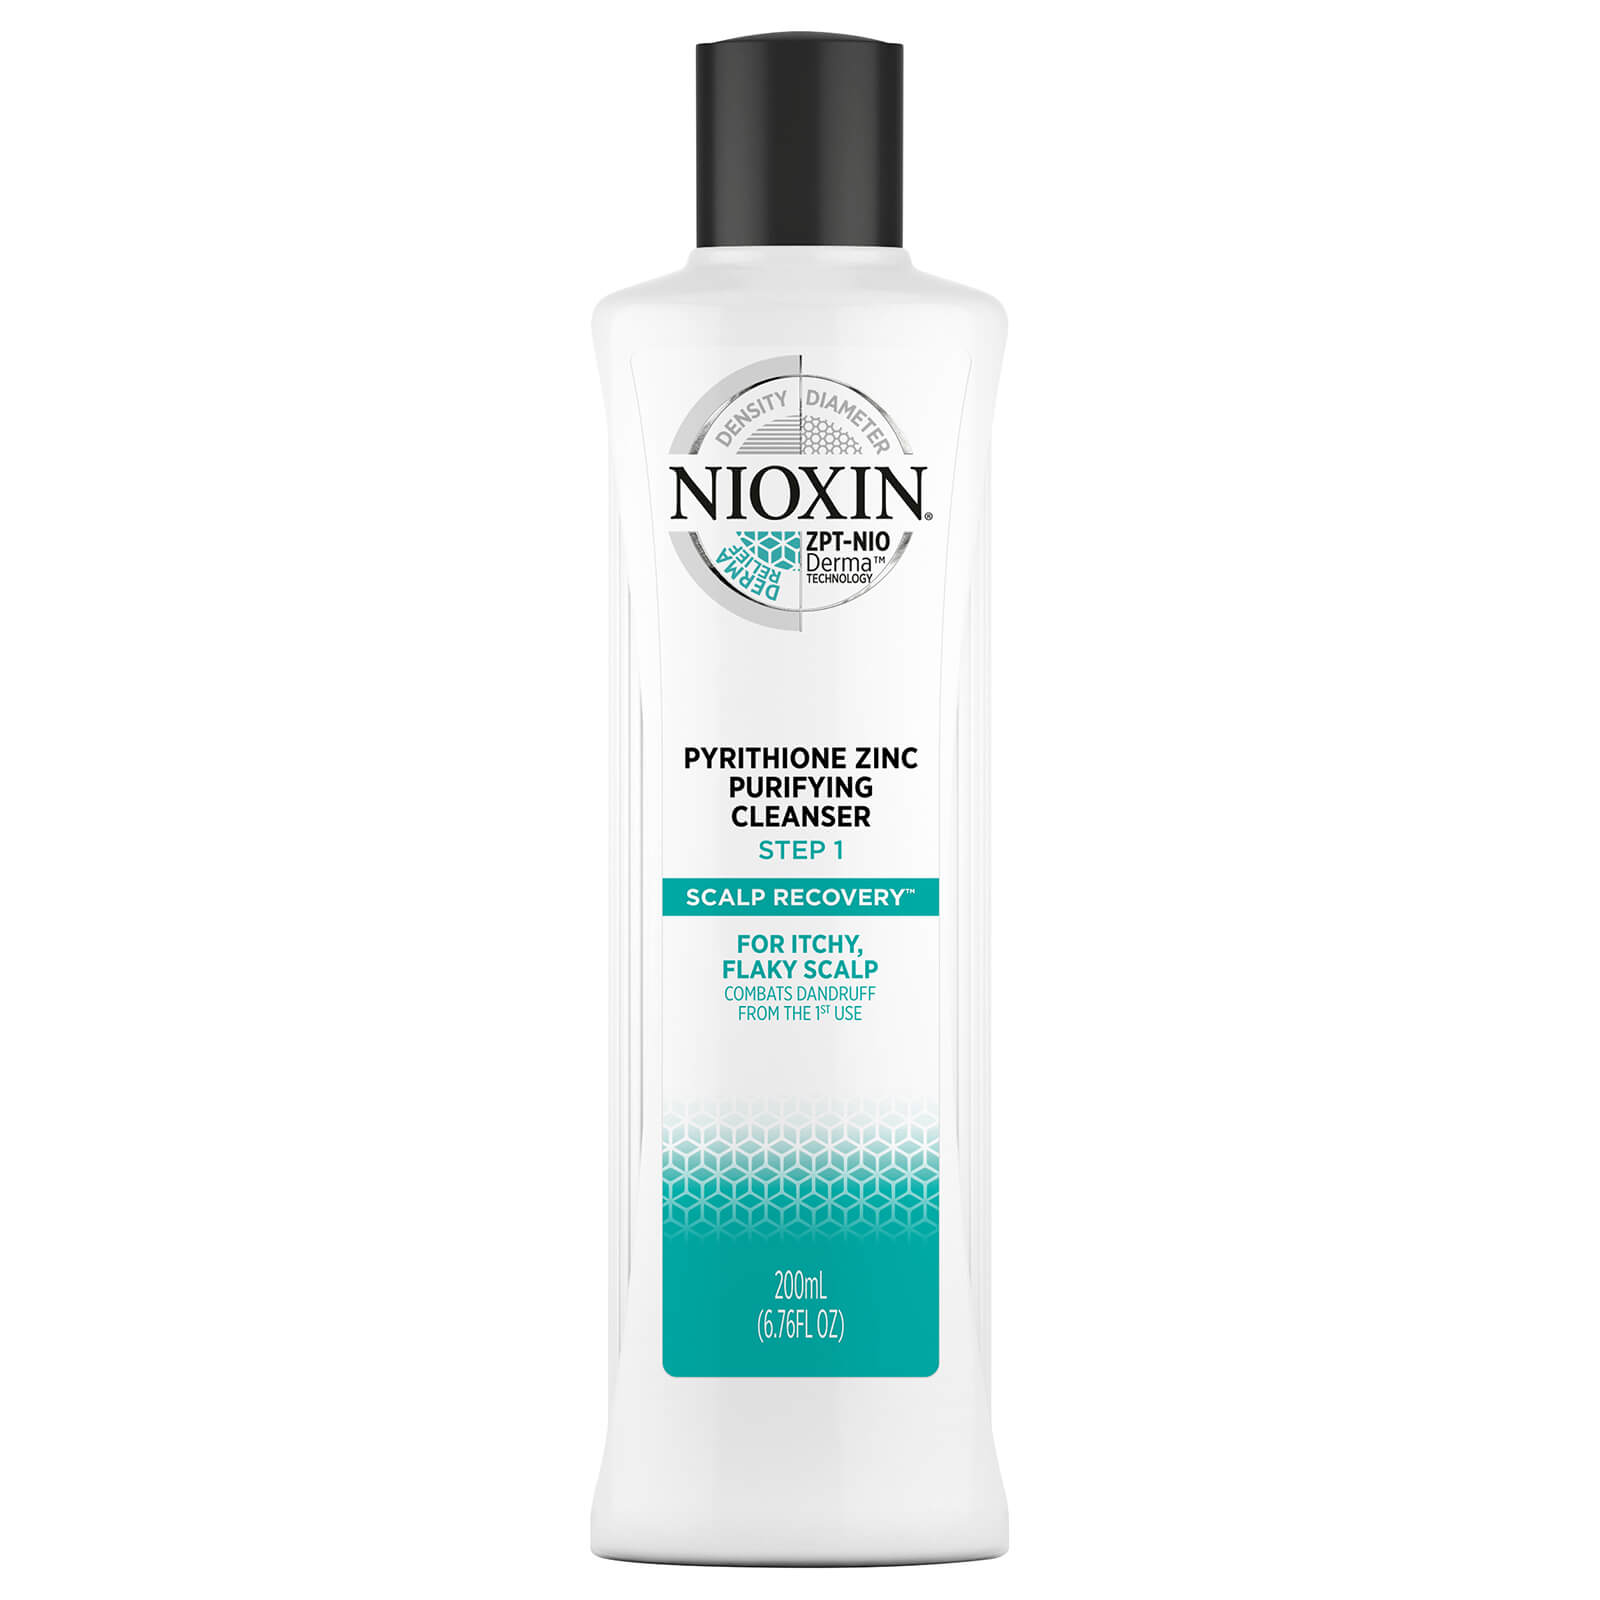 NIOXIN Scalp Recovery Anti-Dandruff Purifying Cleanser for Itchy, Flaky Scalp 200ml